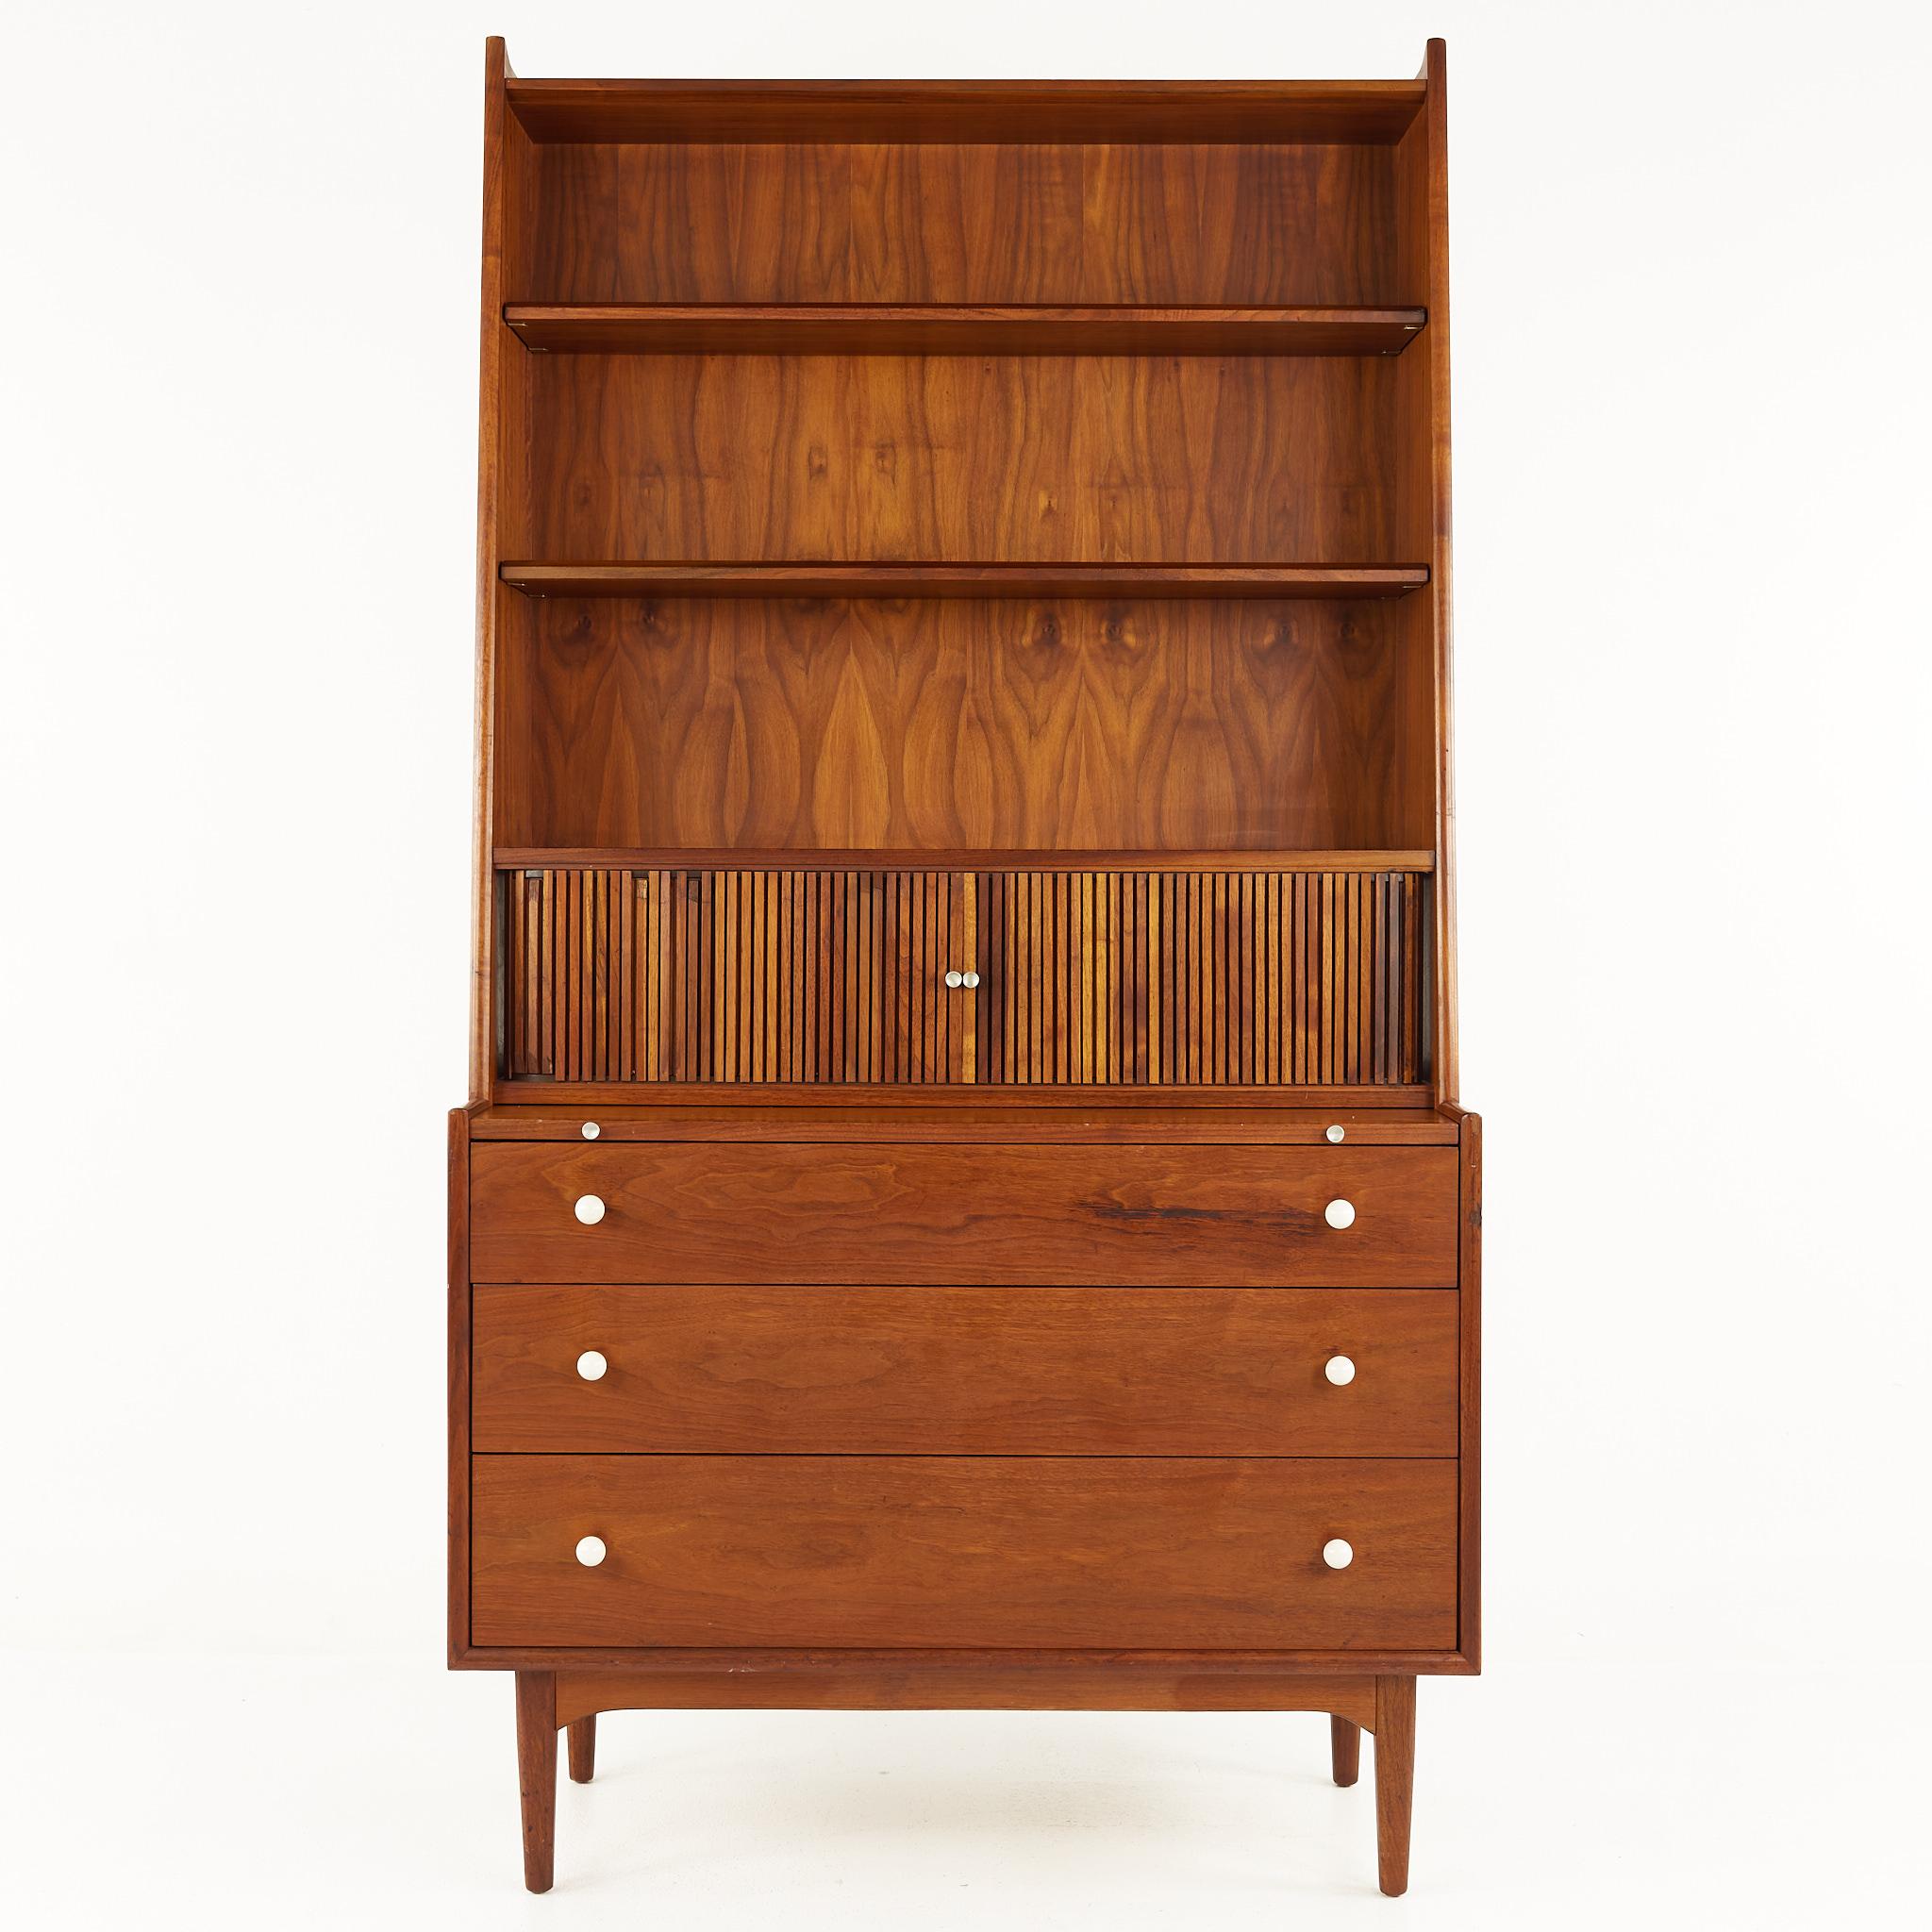 Kipp Stewart for Drexel Declarations Mid Century Walnut Tambour Bookcase Secretary Desk

The bookcase measures: 38 wide x 18.25 deep x 71.25 inches high

All pieces of furniture can be had in what we call restored vintage condition. That means